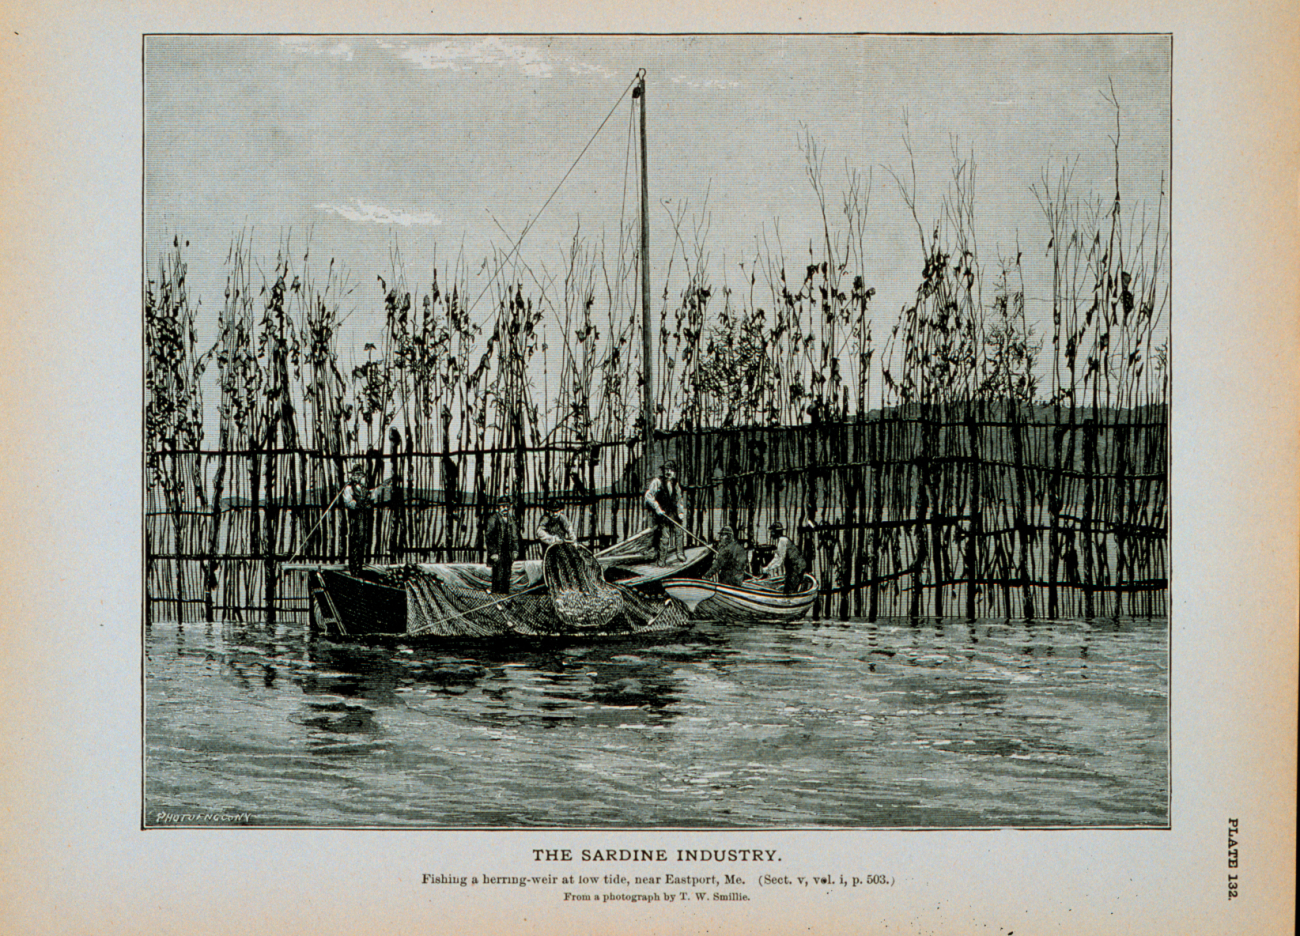 Fishing a herring weir at low tide, near Eastport, MaineFrom a photograph by T